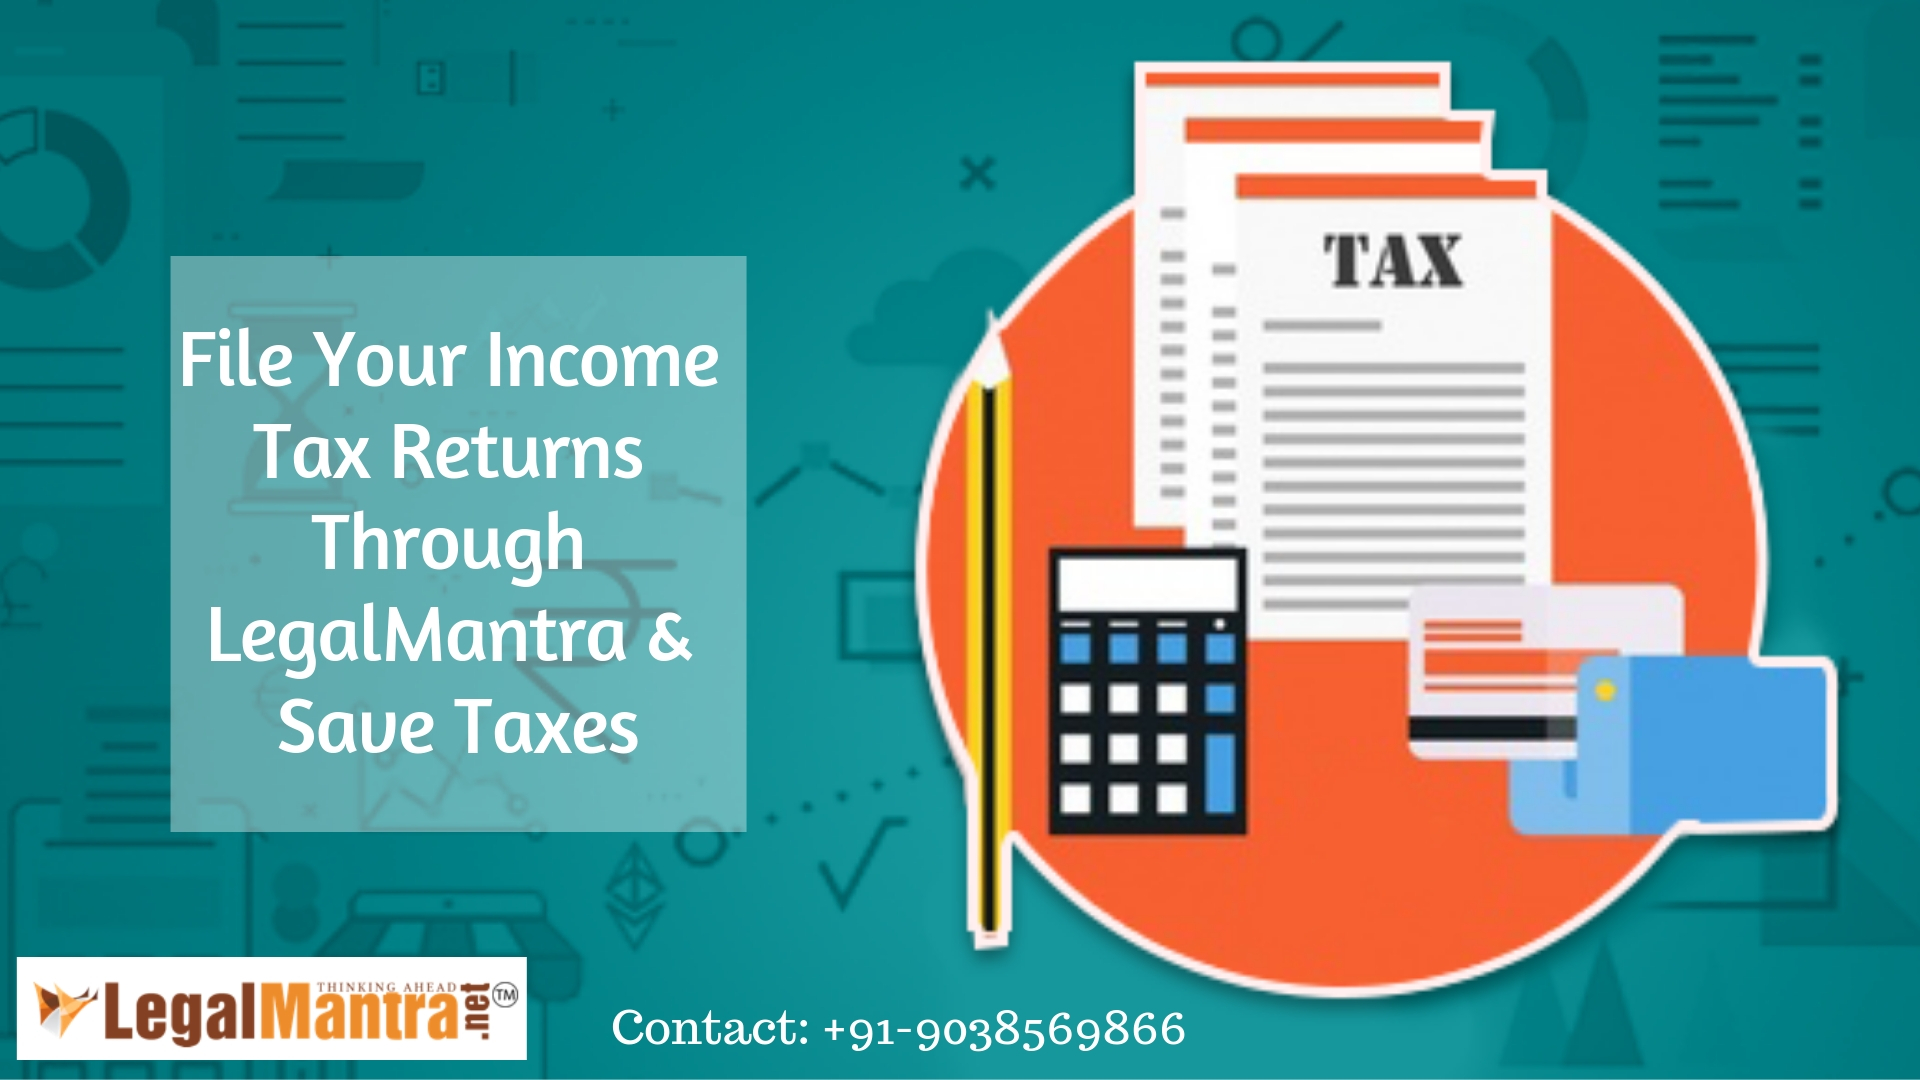 196 Income Tax Return per second– Time to believe Incredible India